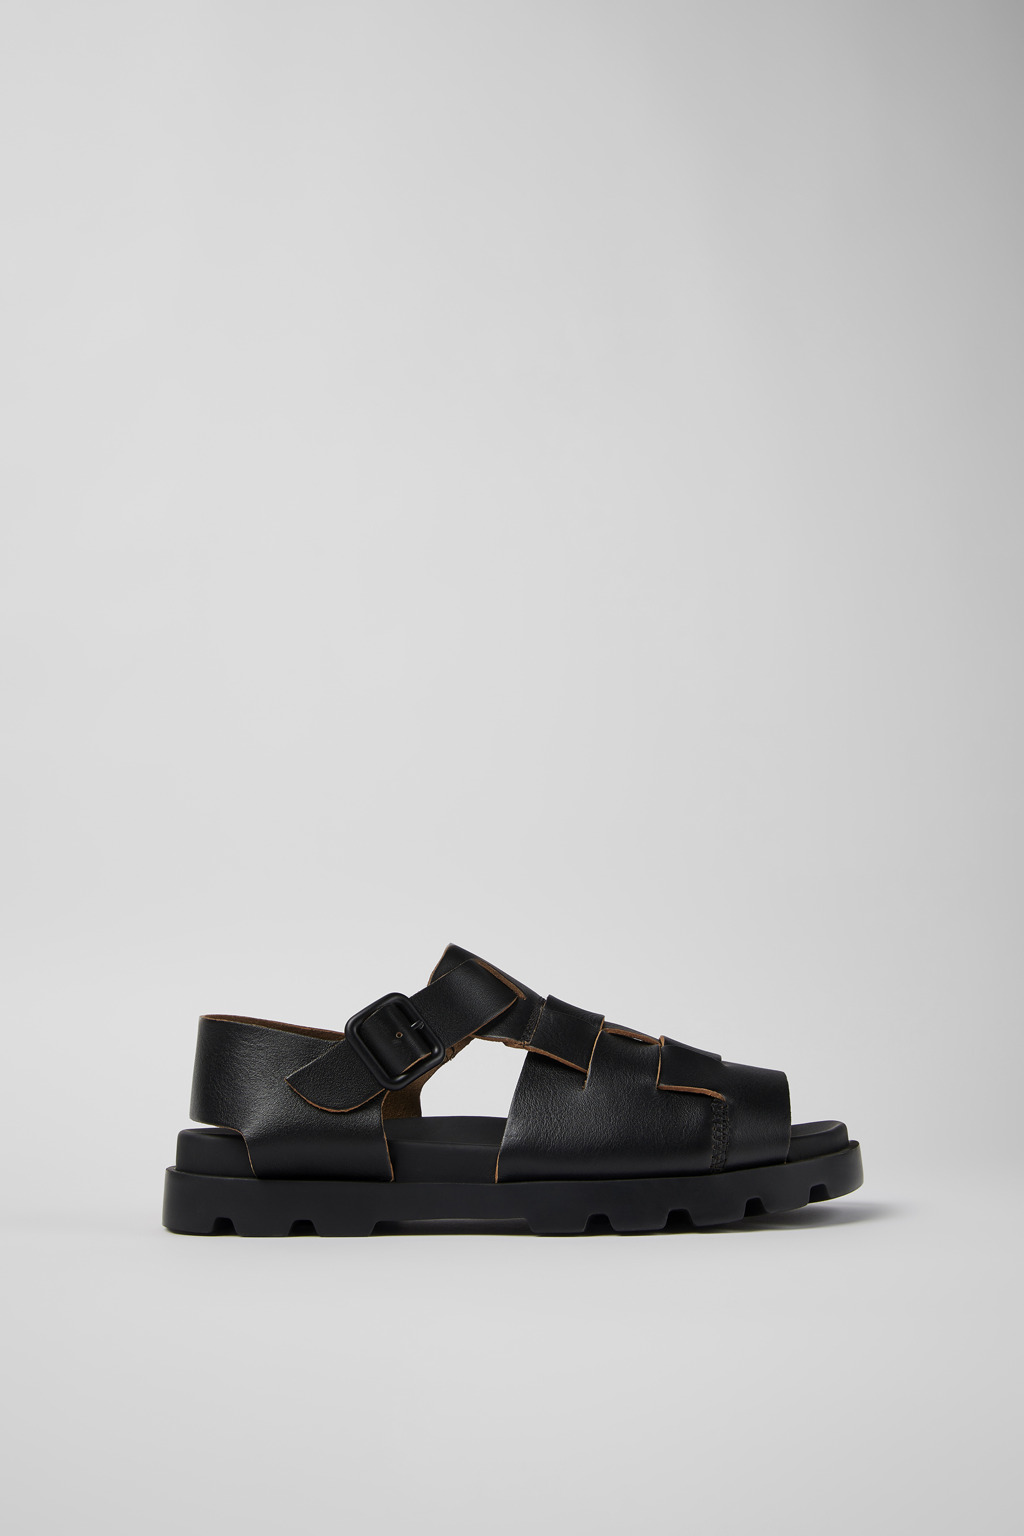 Brutus Black Sandals for Women - Fall/Winter collection - Camper 